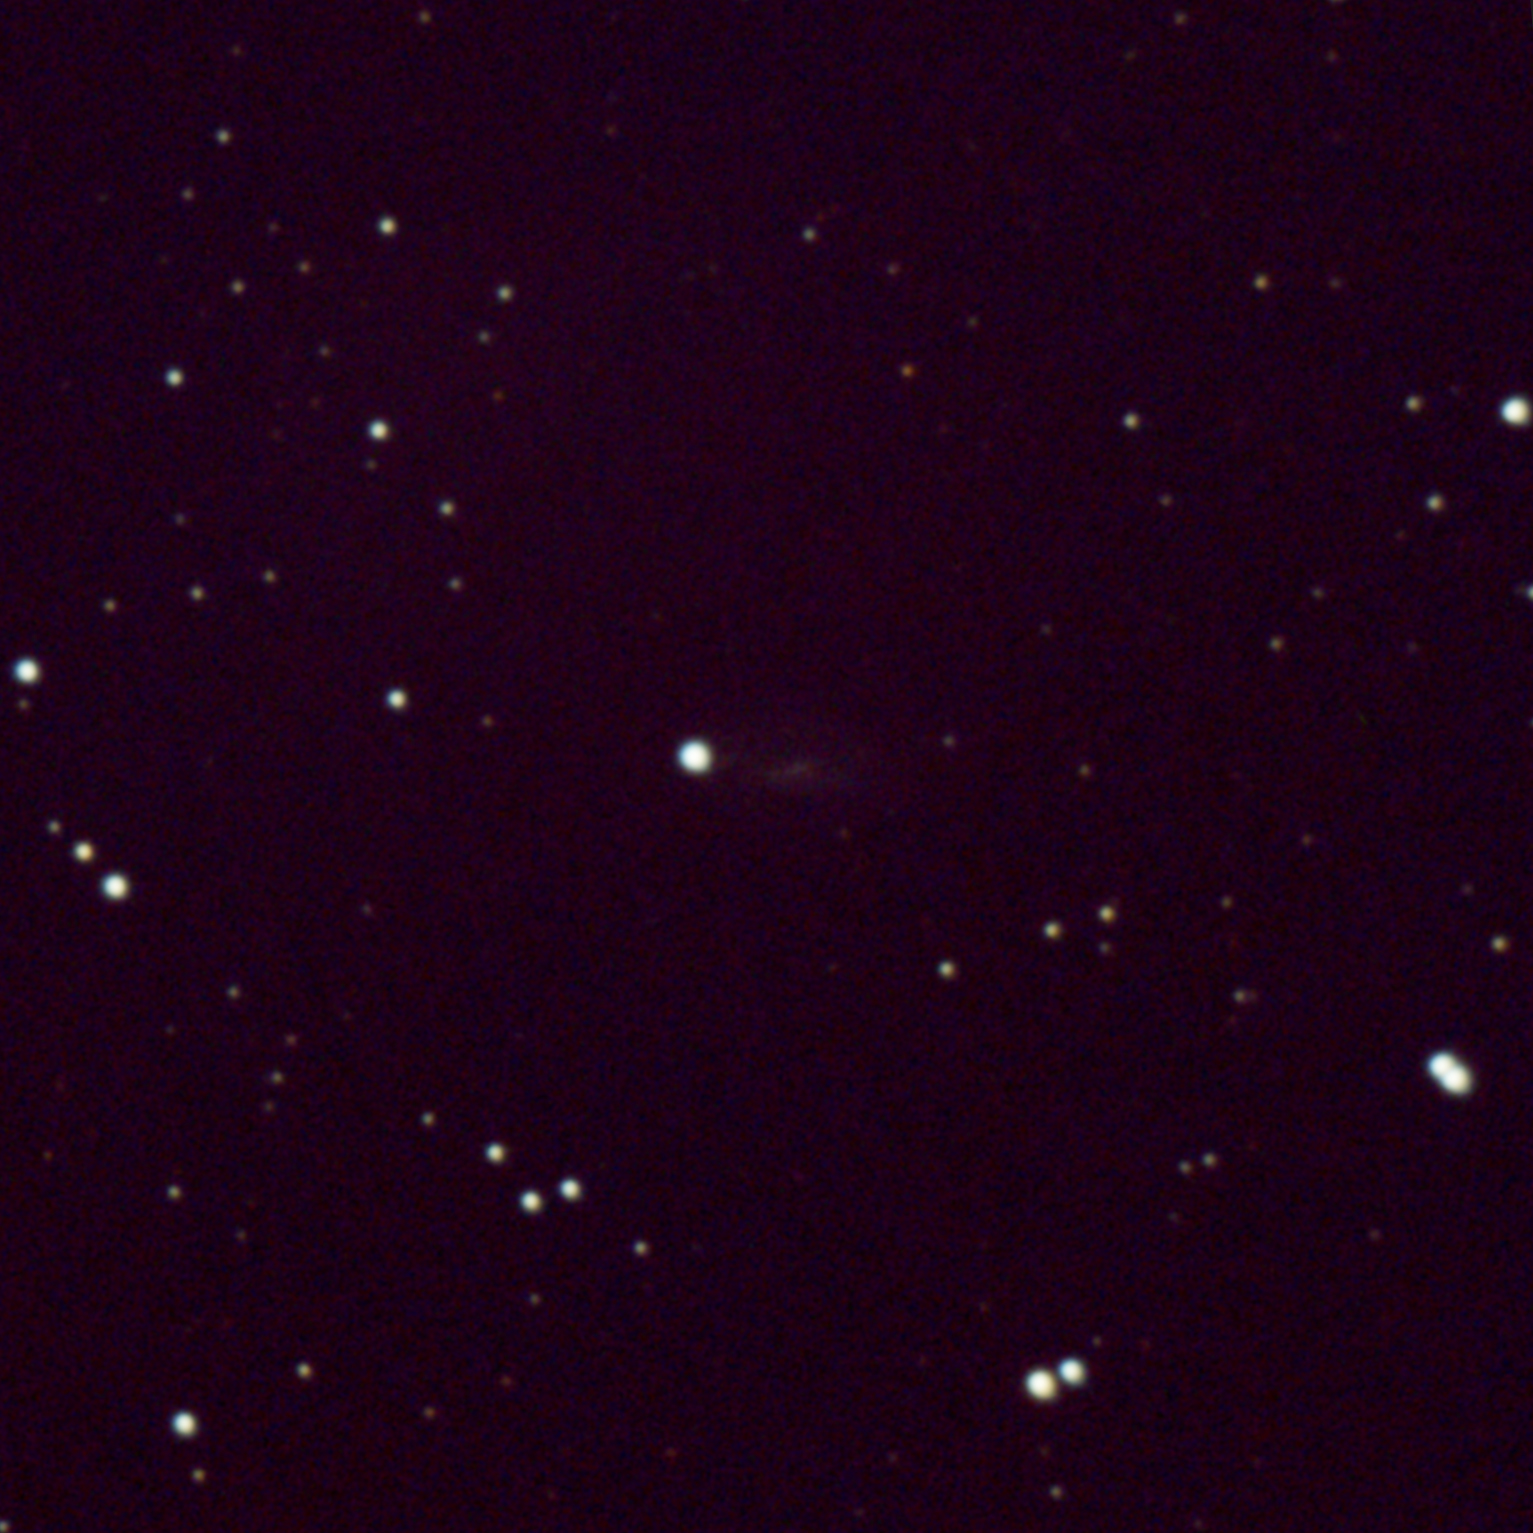 NGC2273B c11f10 2600 g350 br40 nofilter 70F 1050S NoEdit 01202023m